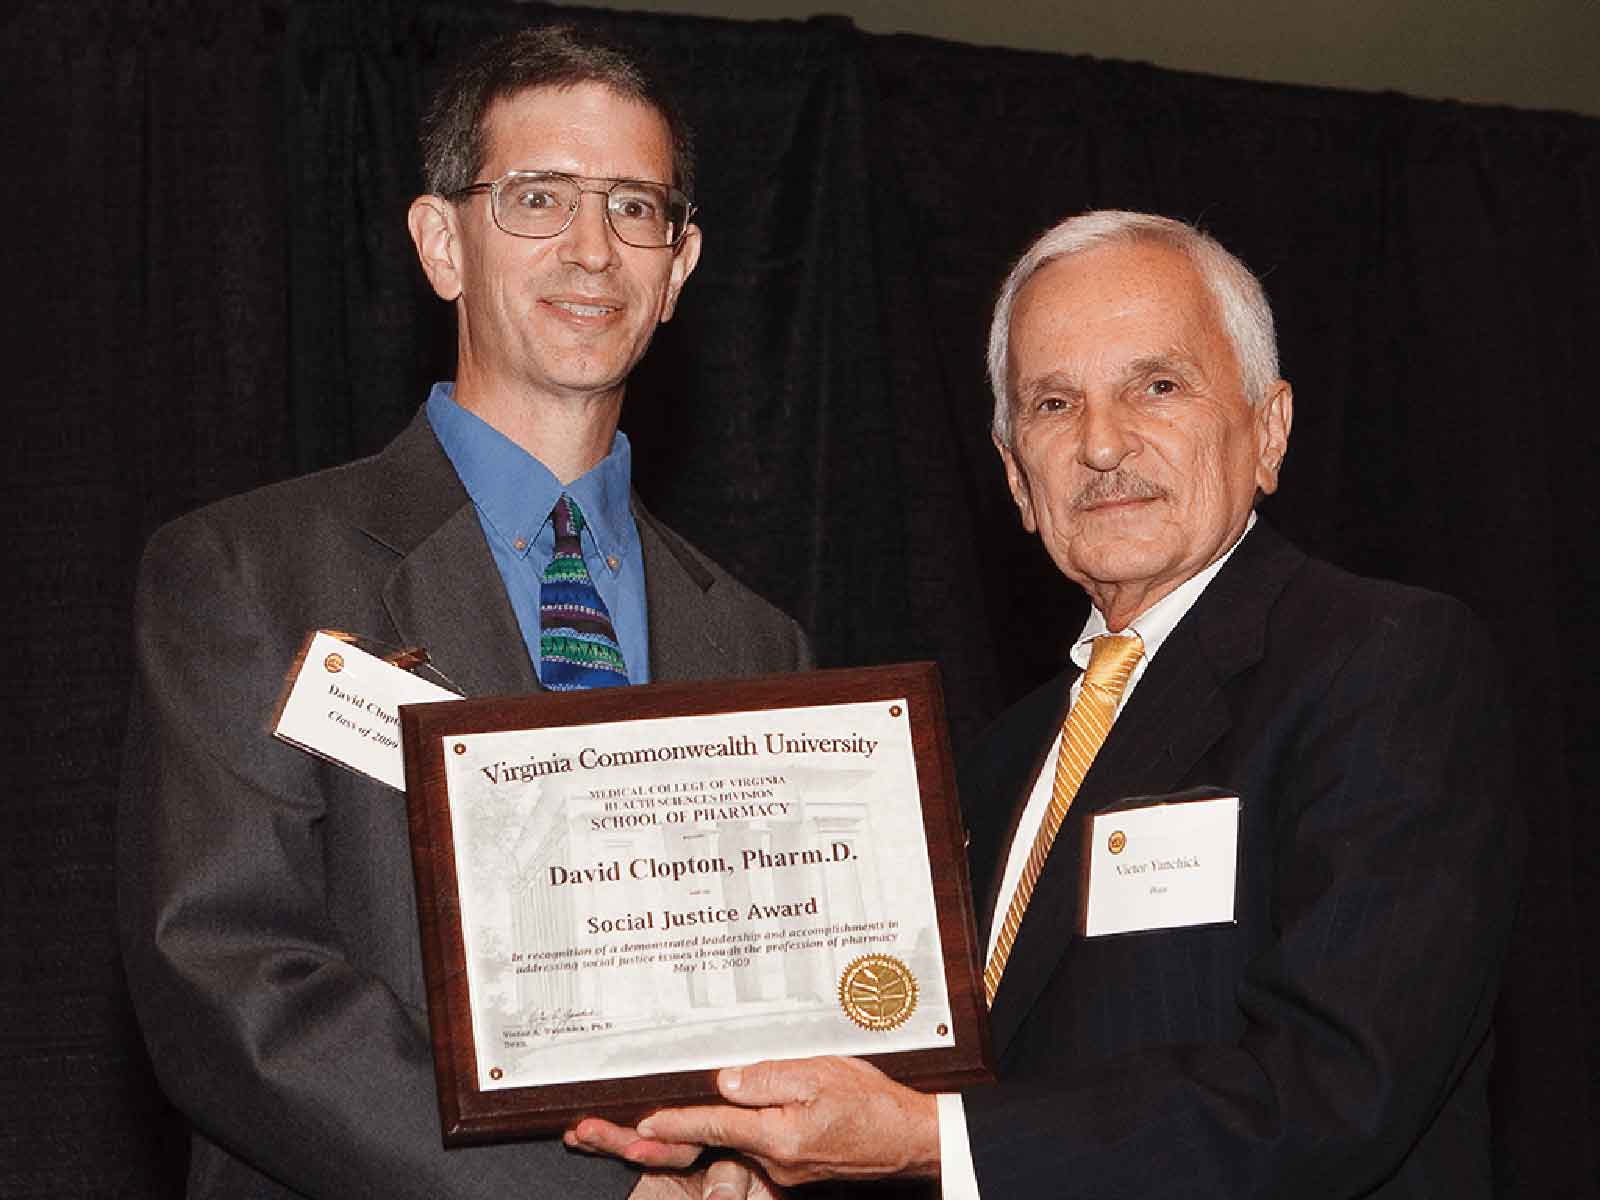 David Clopton, Ph.D., Pharm.D., receiving the Social Justice Award in 2009 from former School of Pharmacy Dean Victor Yanchick